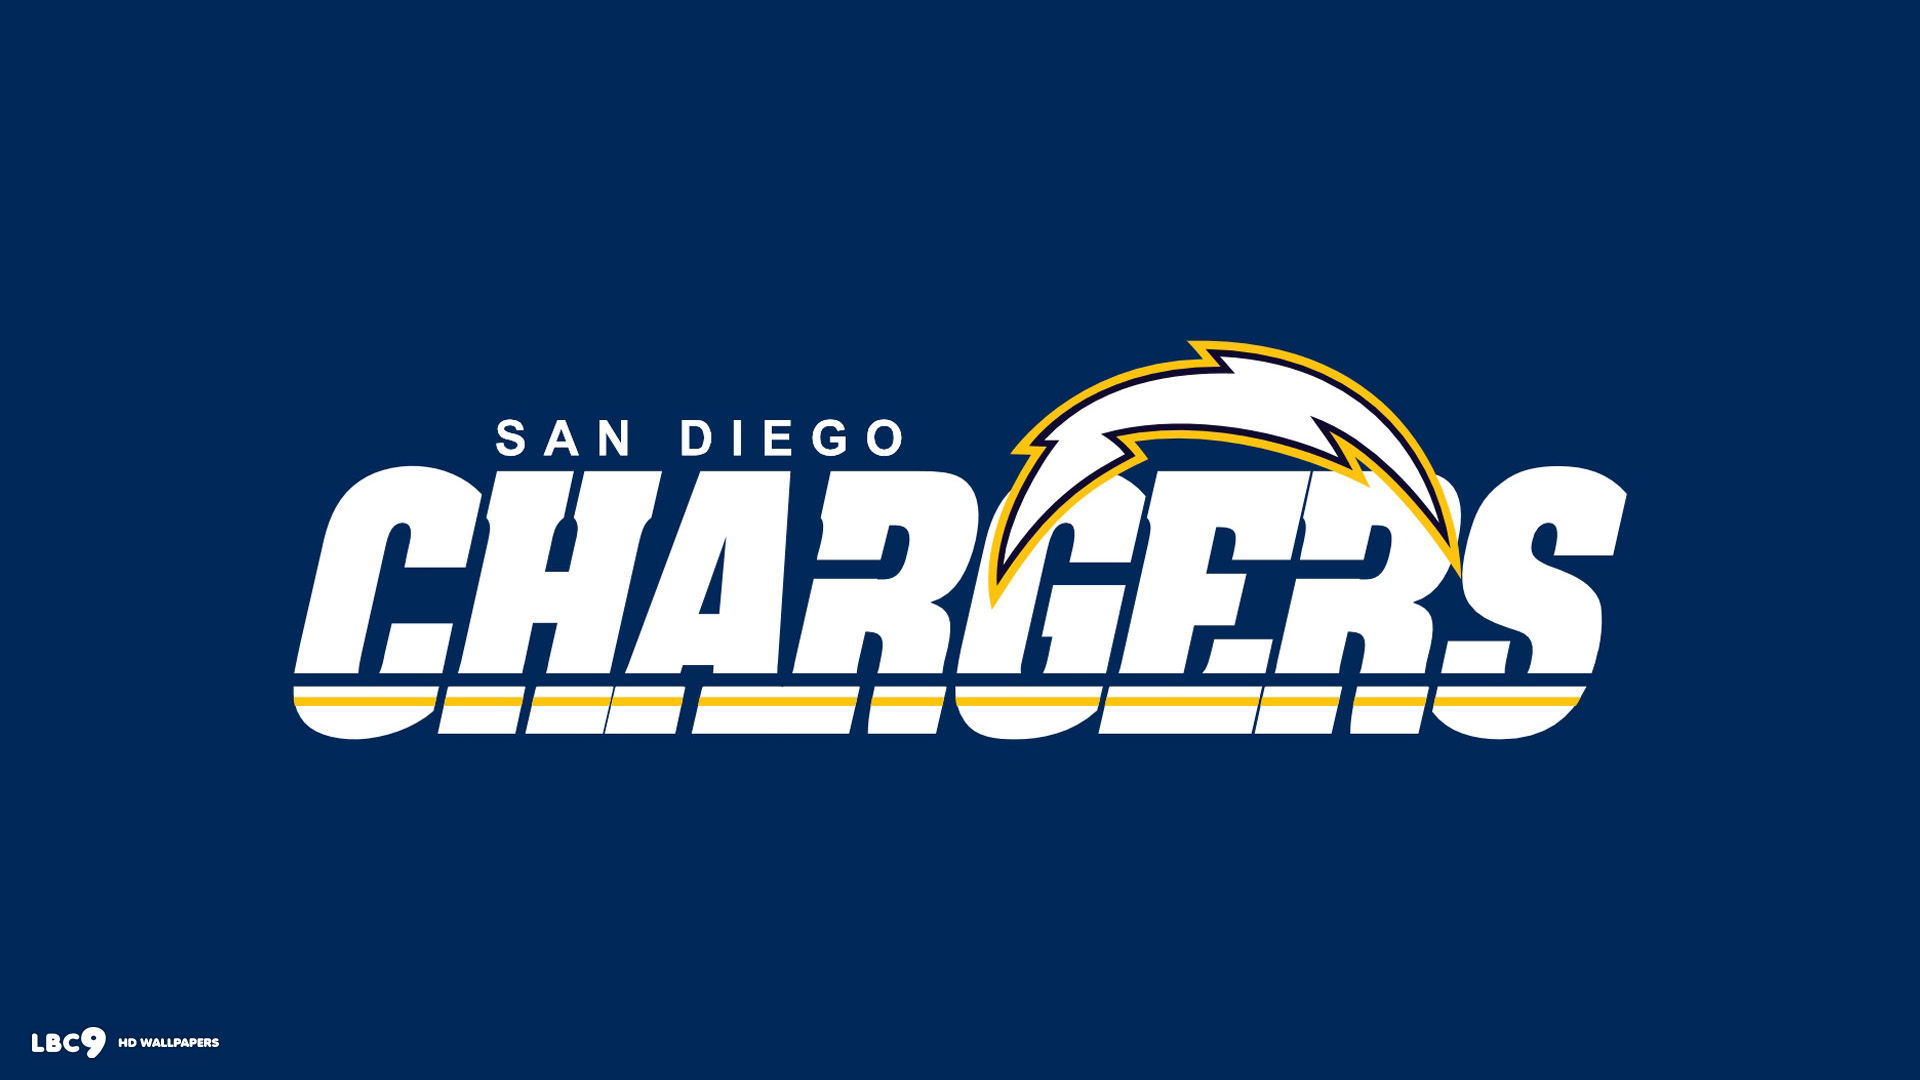 SAN DIEGO CHARGERS nfl football f wallpaper background